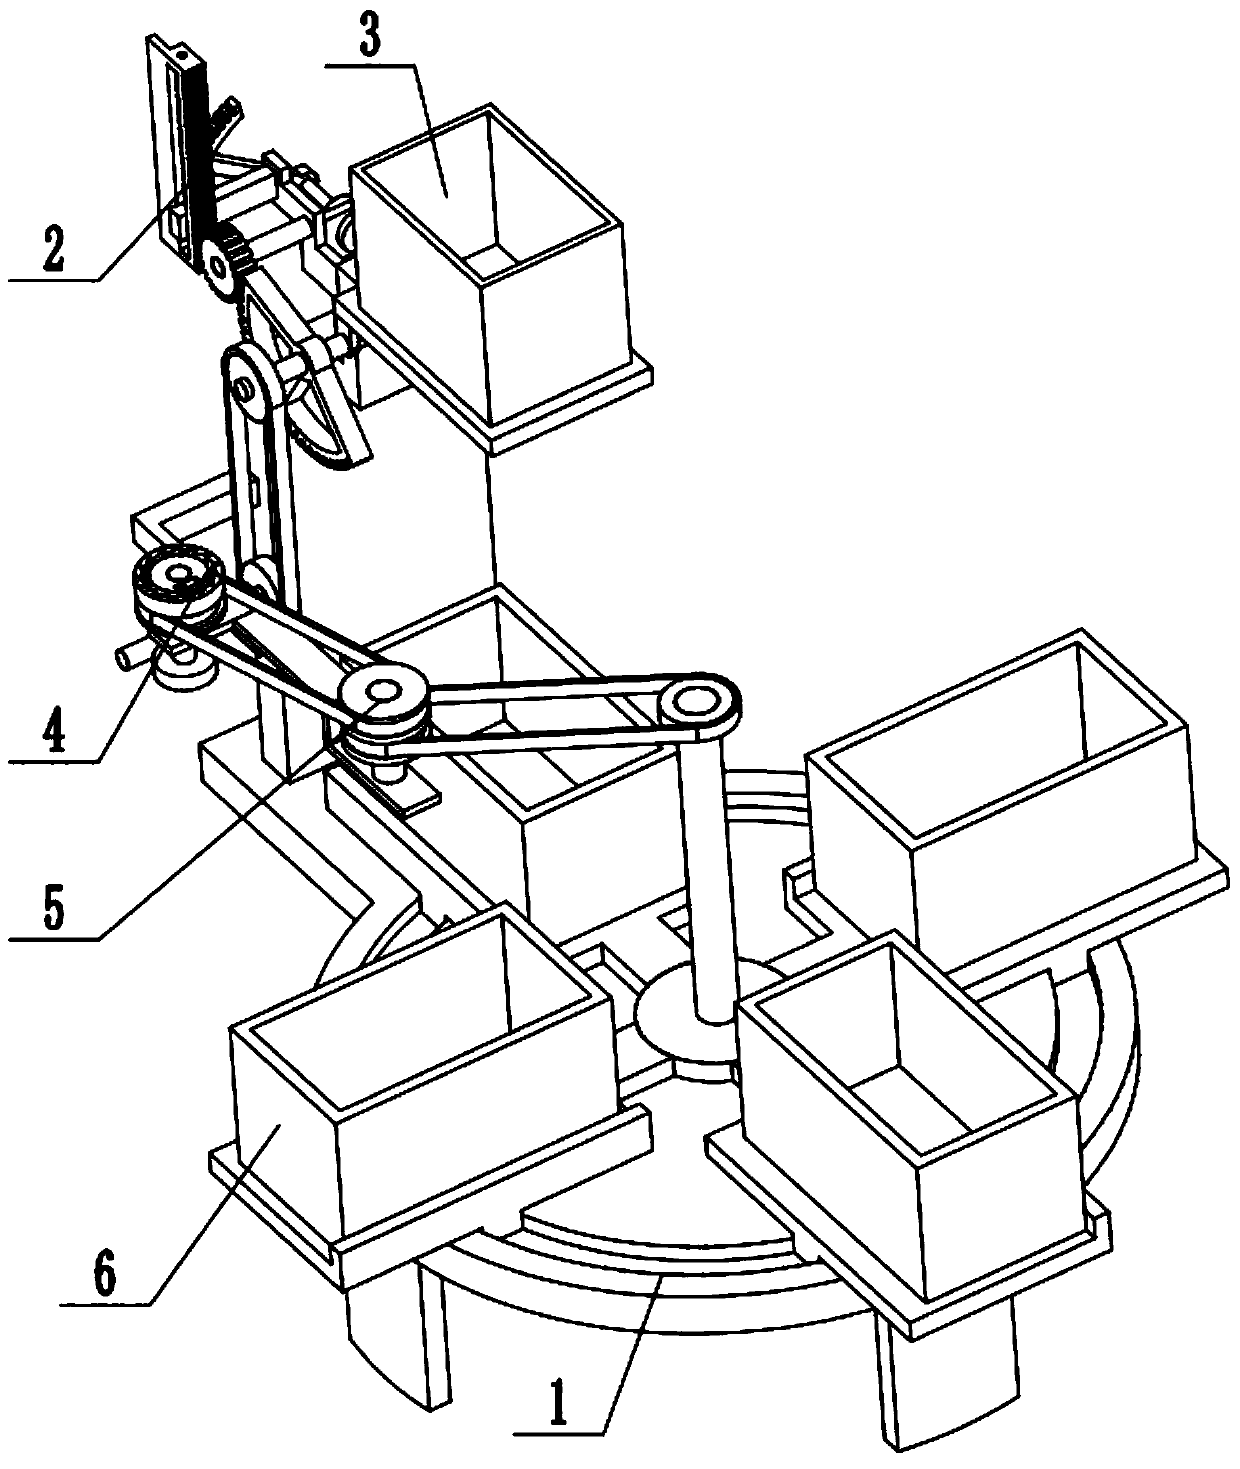 Auxiliary device for railway freight